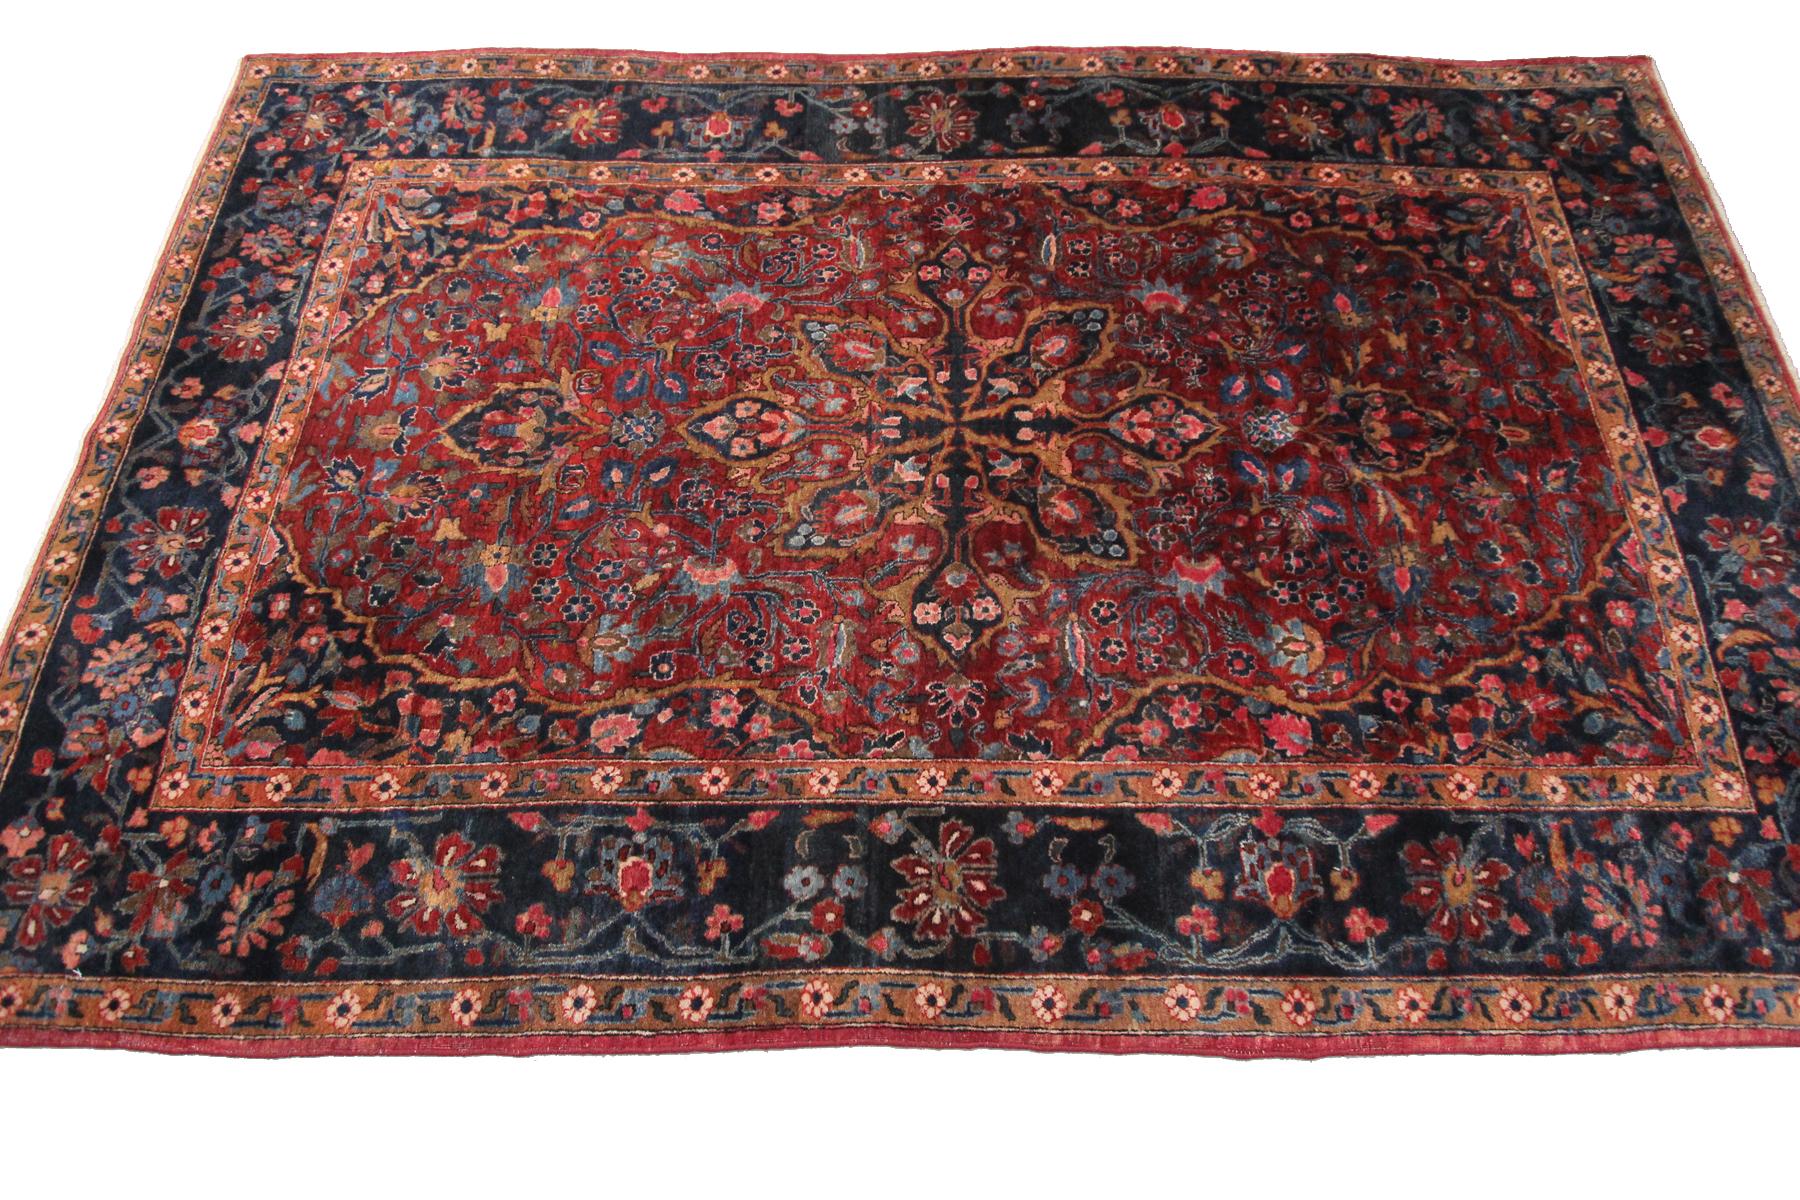 Late 19th Century Antique Manchester Kashan Rug Antique Persian Kashan Rug Persian Rug 1880 For Sale